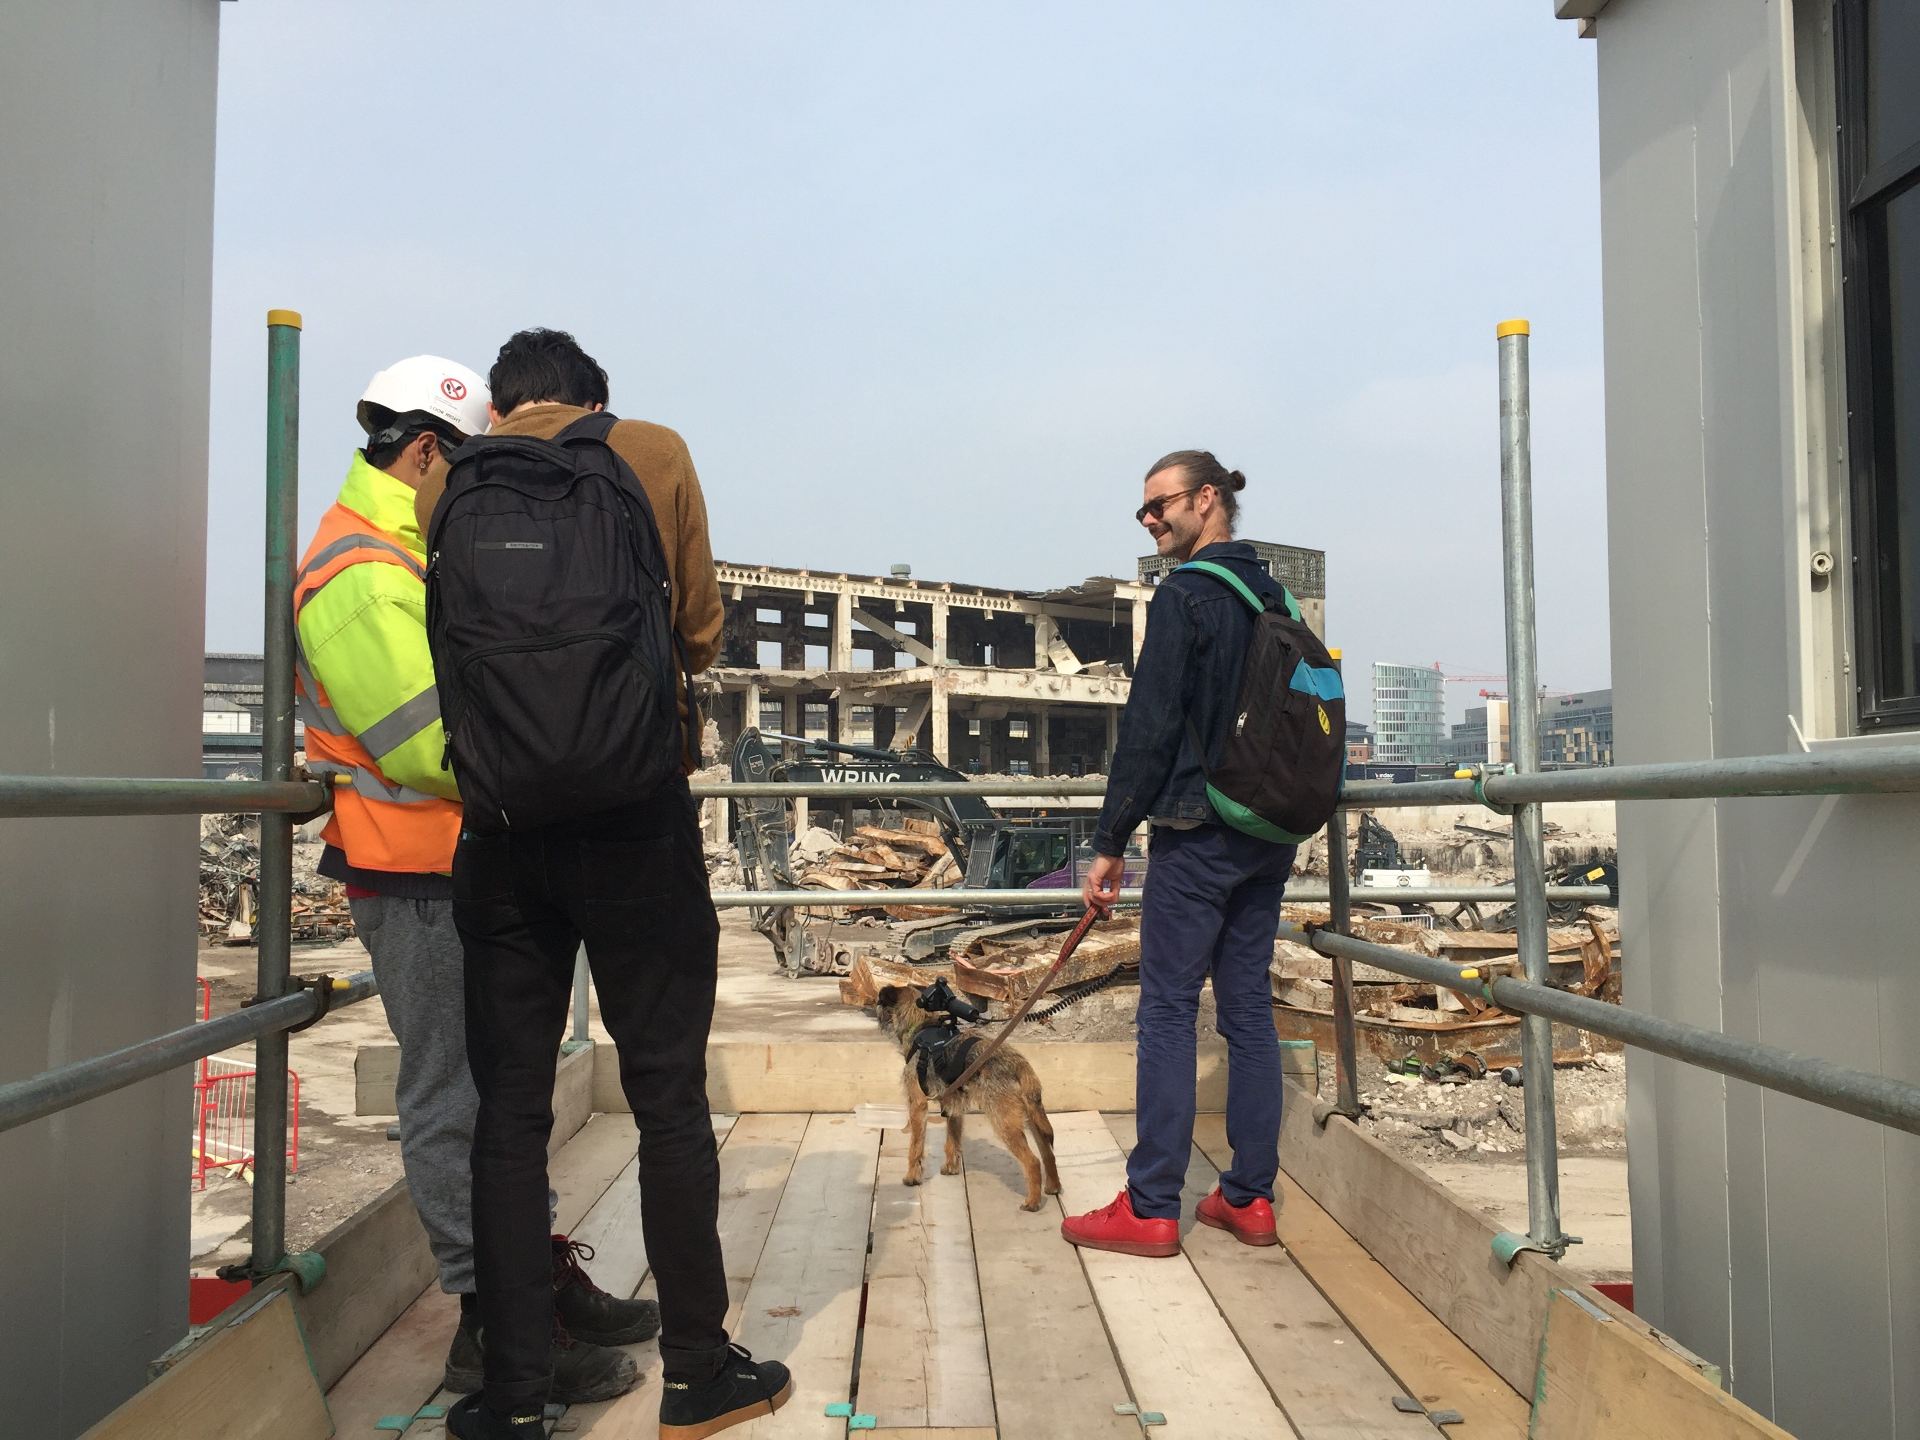 Three people and a dog at a construction site